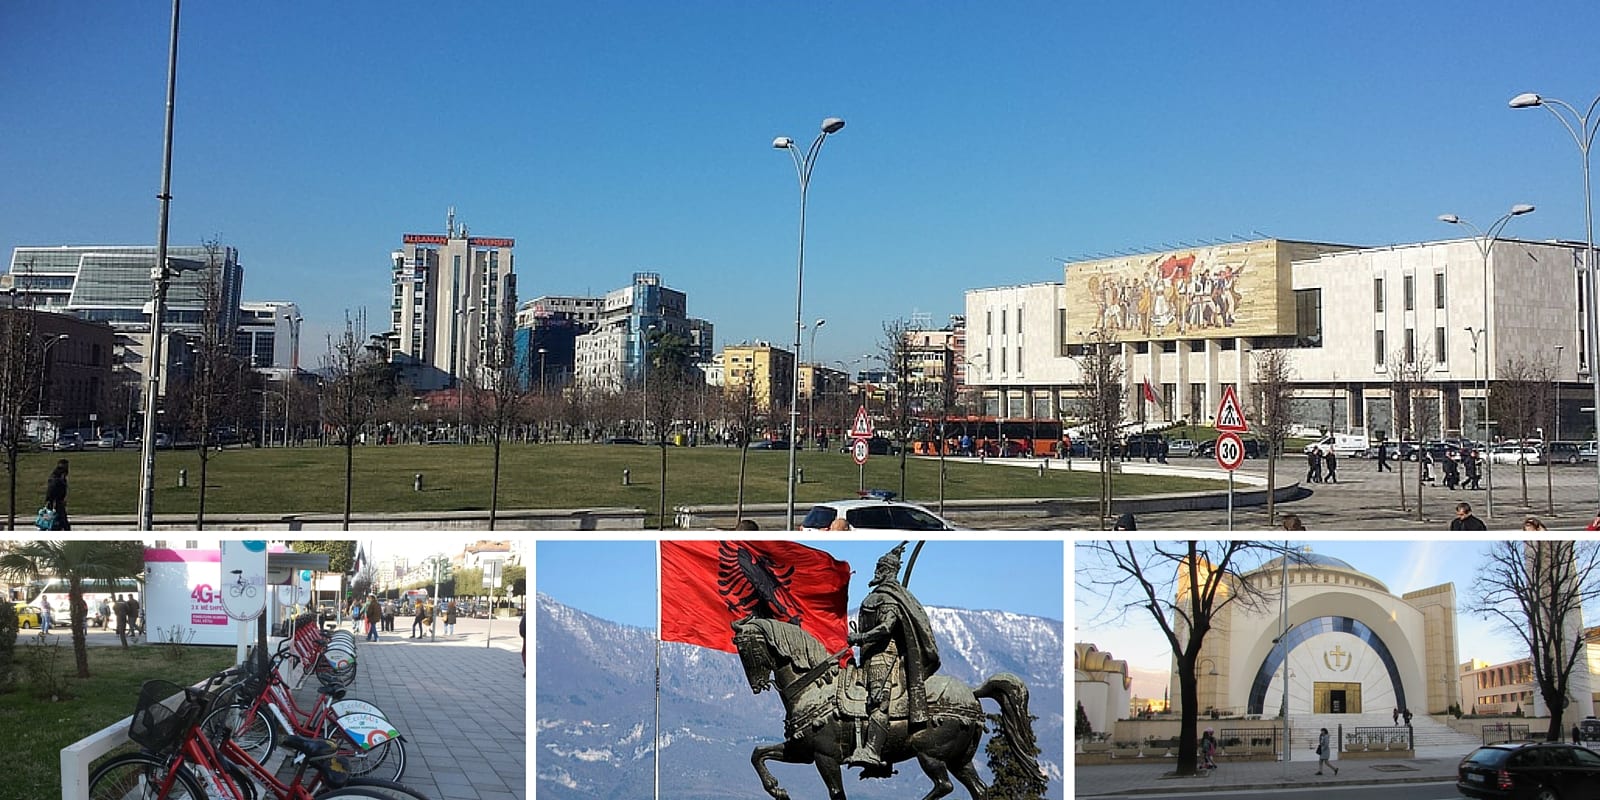 Albania Travel Guide - Forget what you think you know. Here is what you need to know about Albania